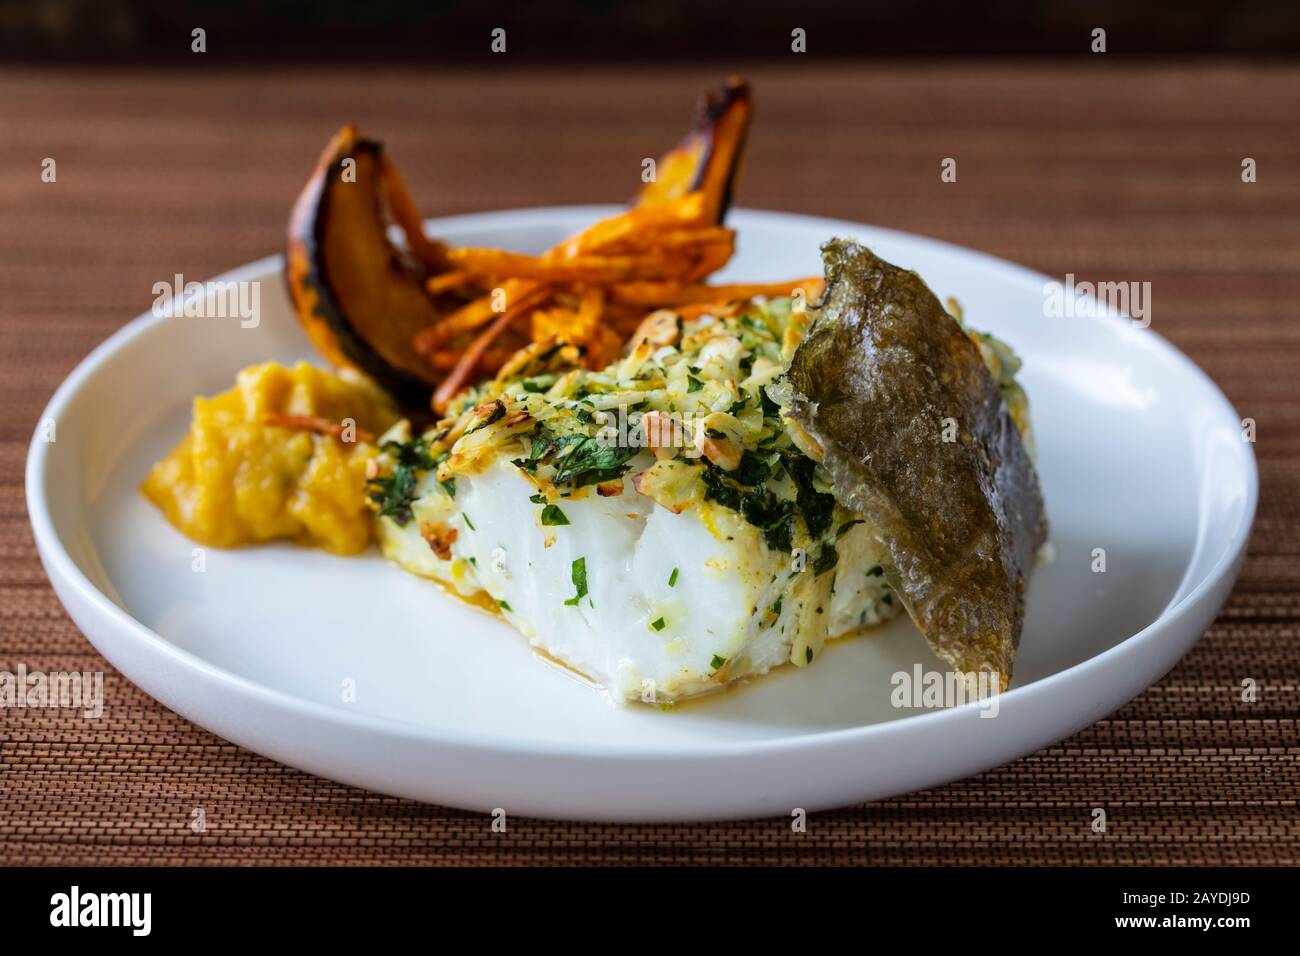 Cod loin in almond crust with pumpkin and fennel Stock Photo